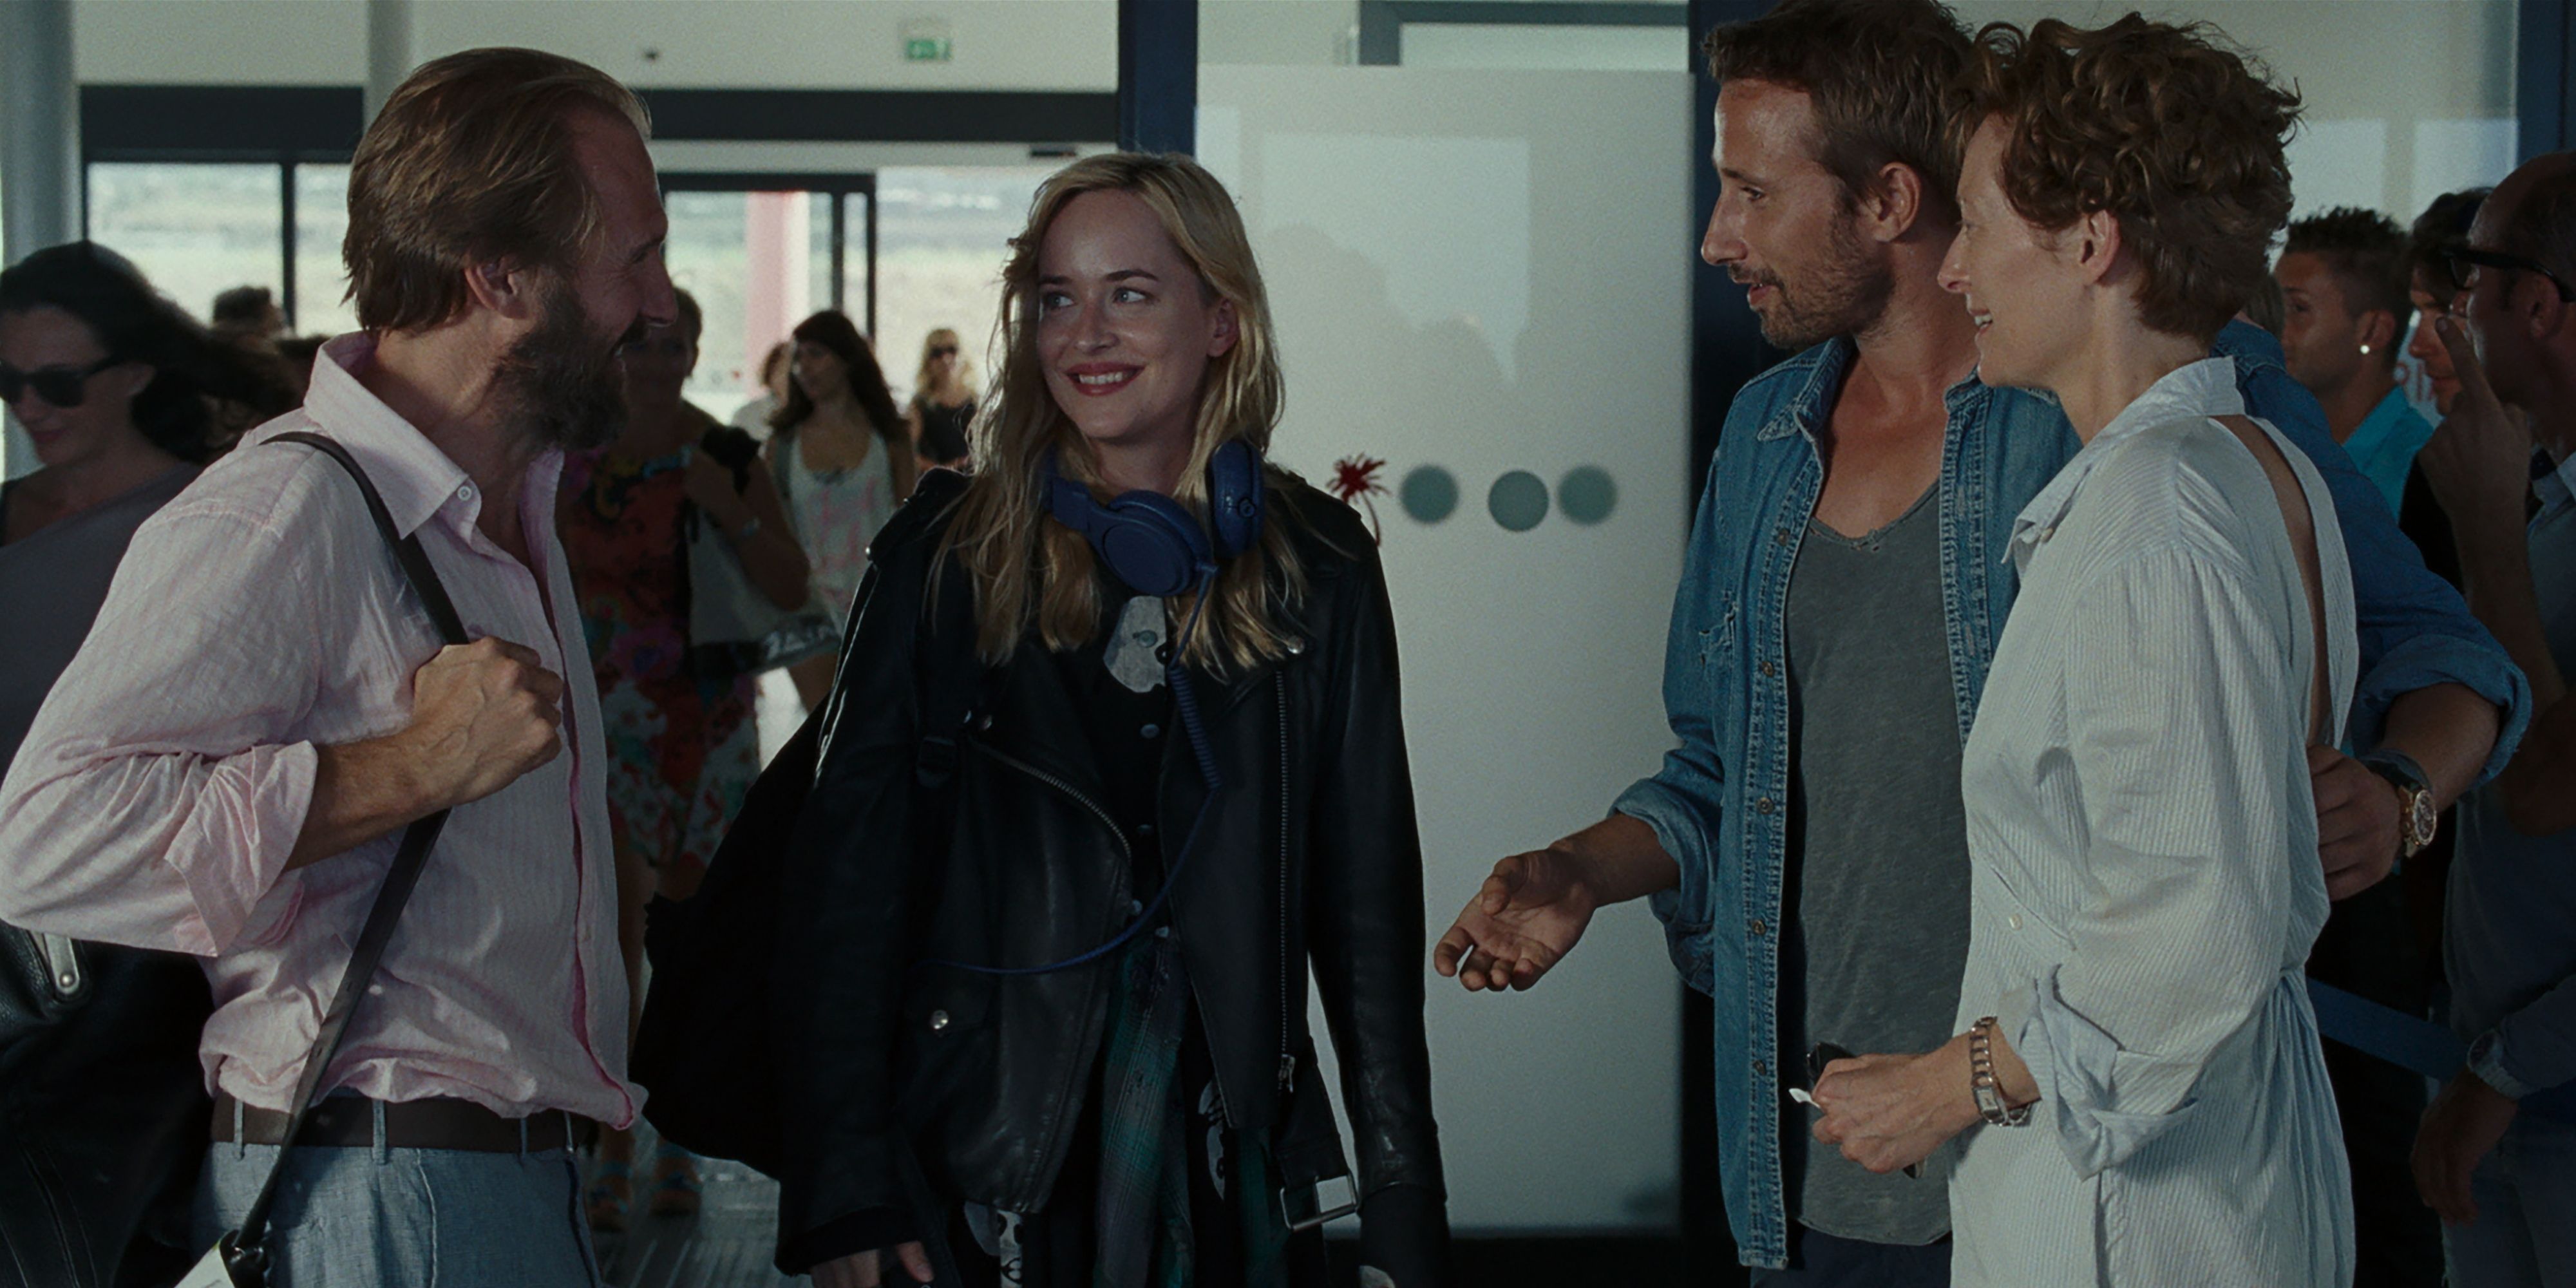 Four people meeting in an airport in the film A Bigger Splash